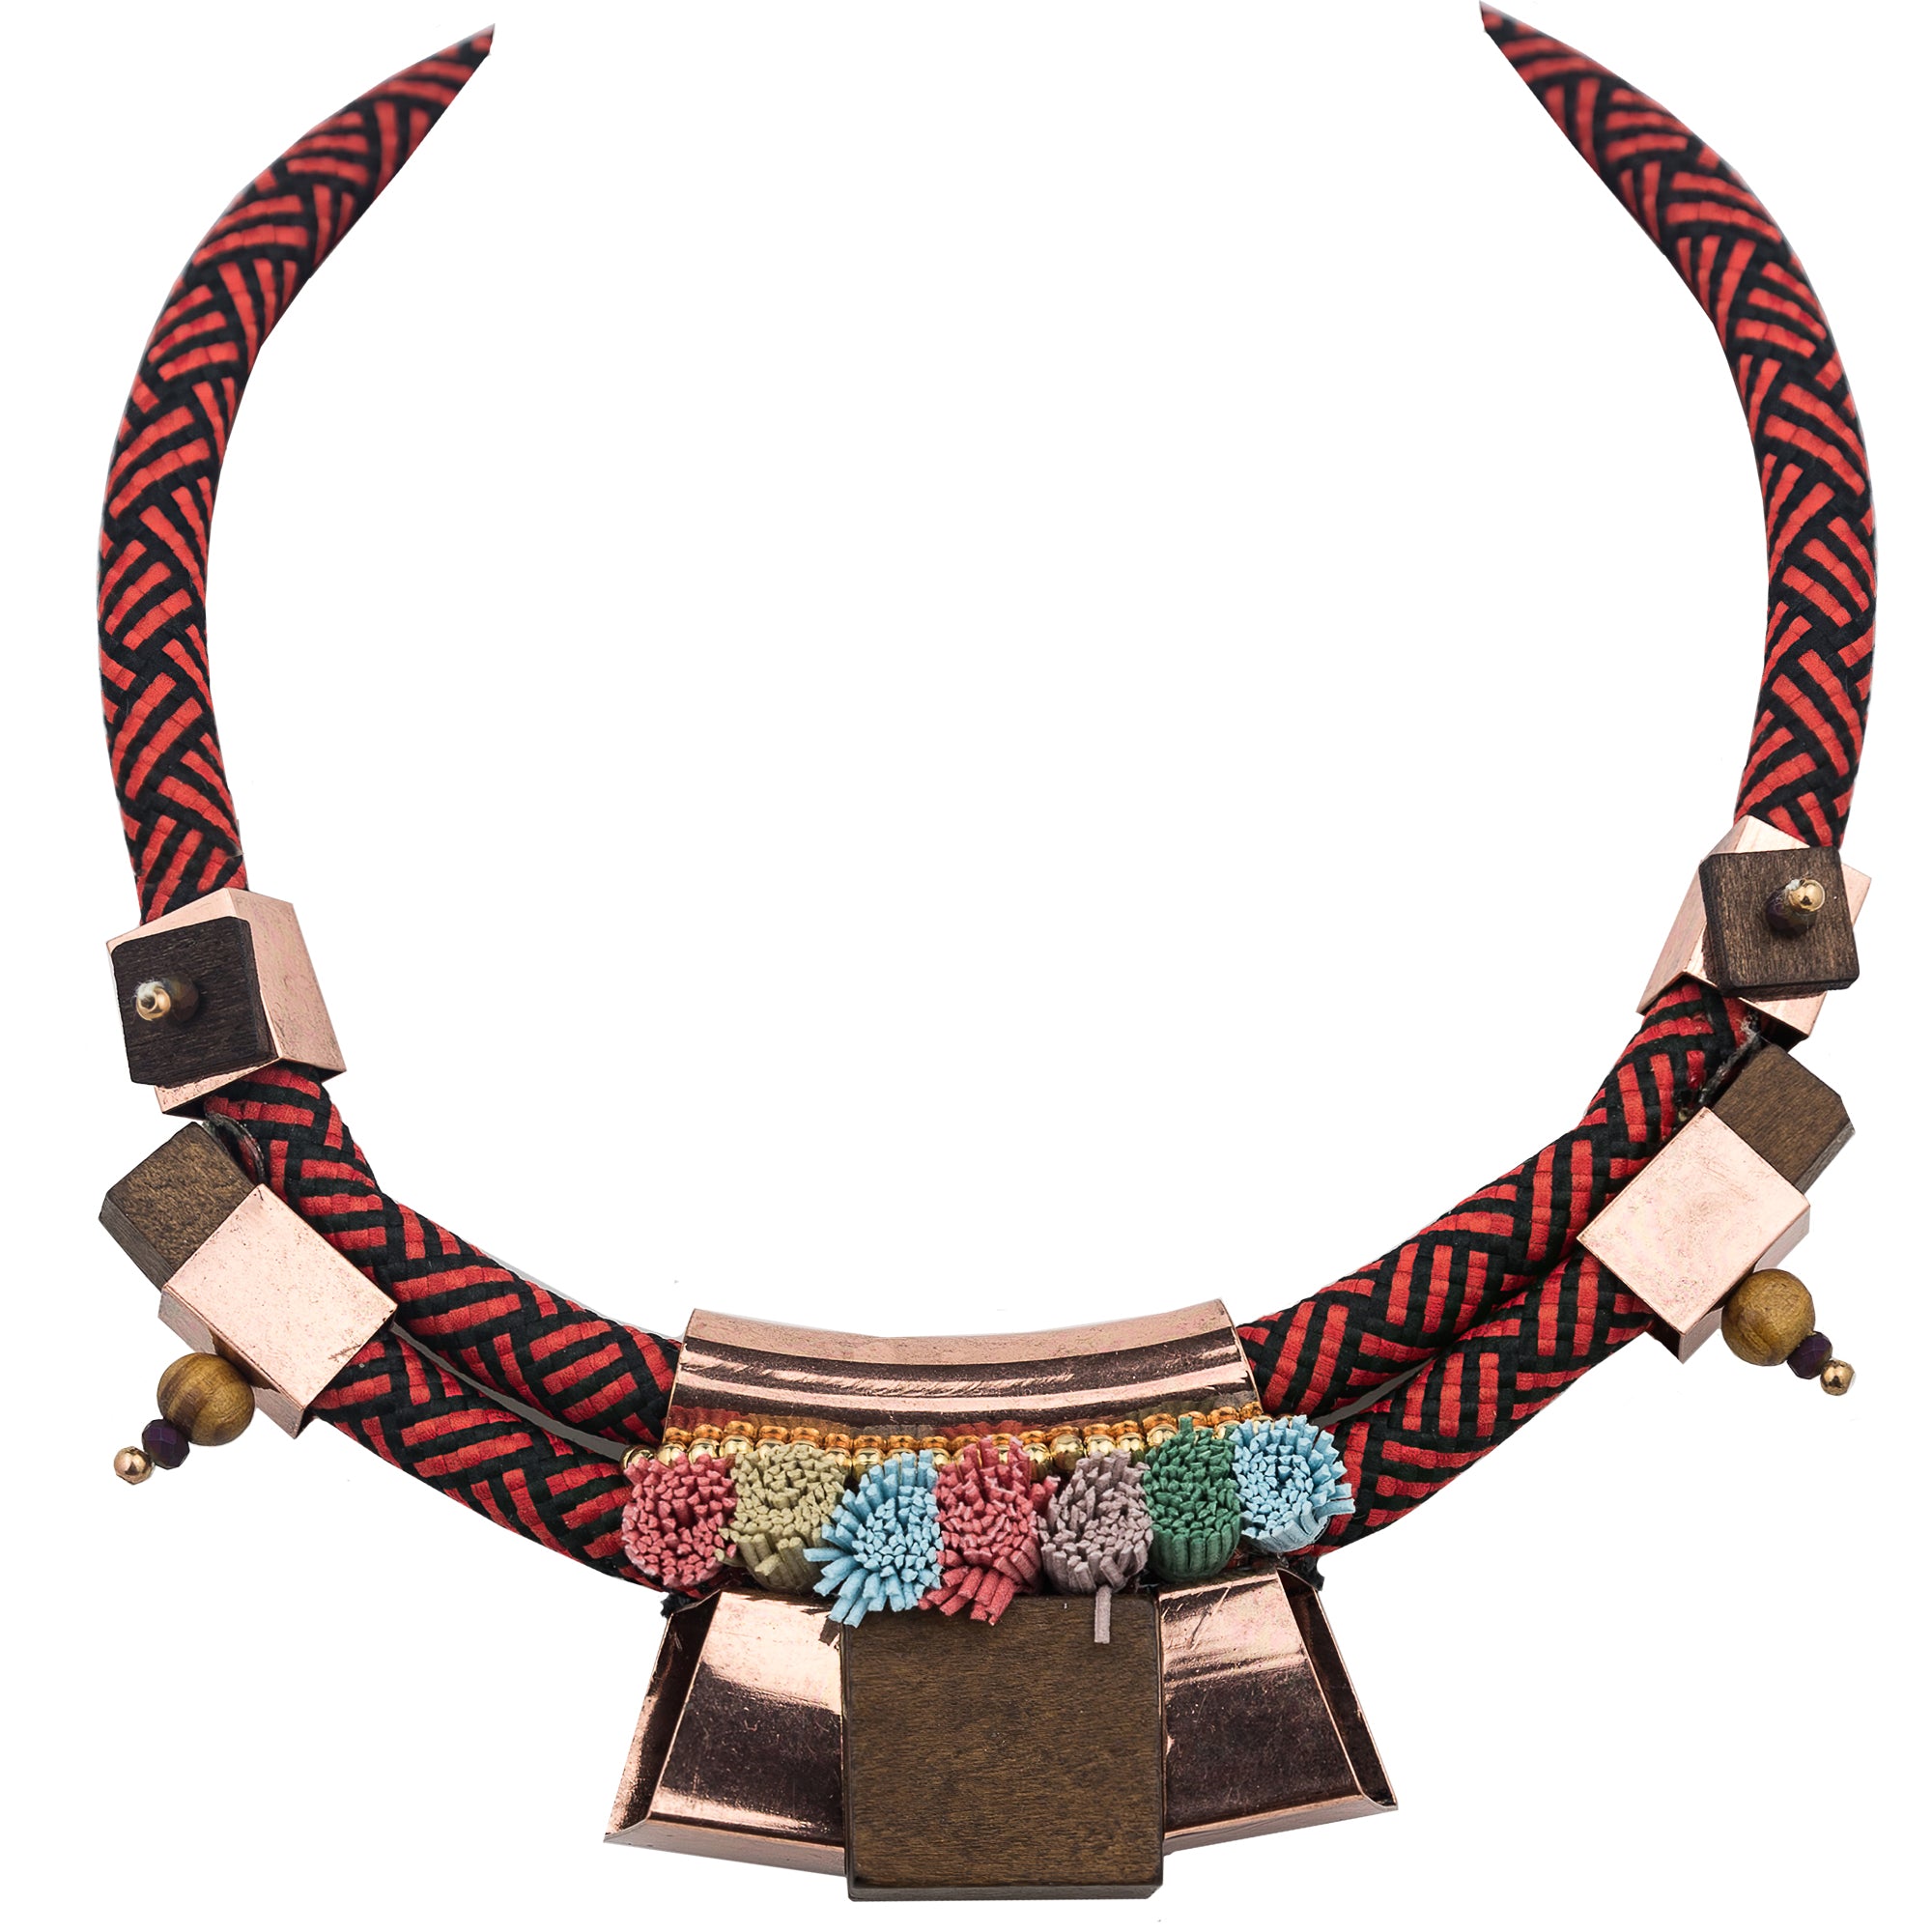 This artistic handmade necklace makes a great addition to any look! Eclectic, fun and frivolous  Copper, wood, and faux leather enhancements Red and black intricately patterned soft cloth cord Lobster claw clasp Adjustable length to 8”-9”, 20.3cm-22.86cm